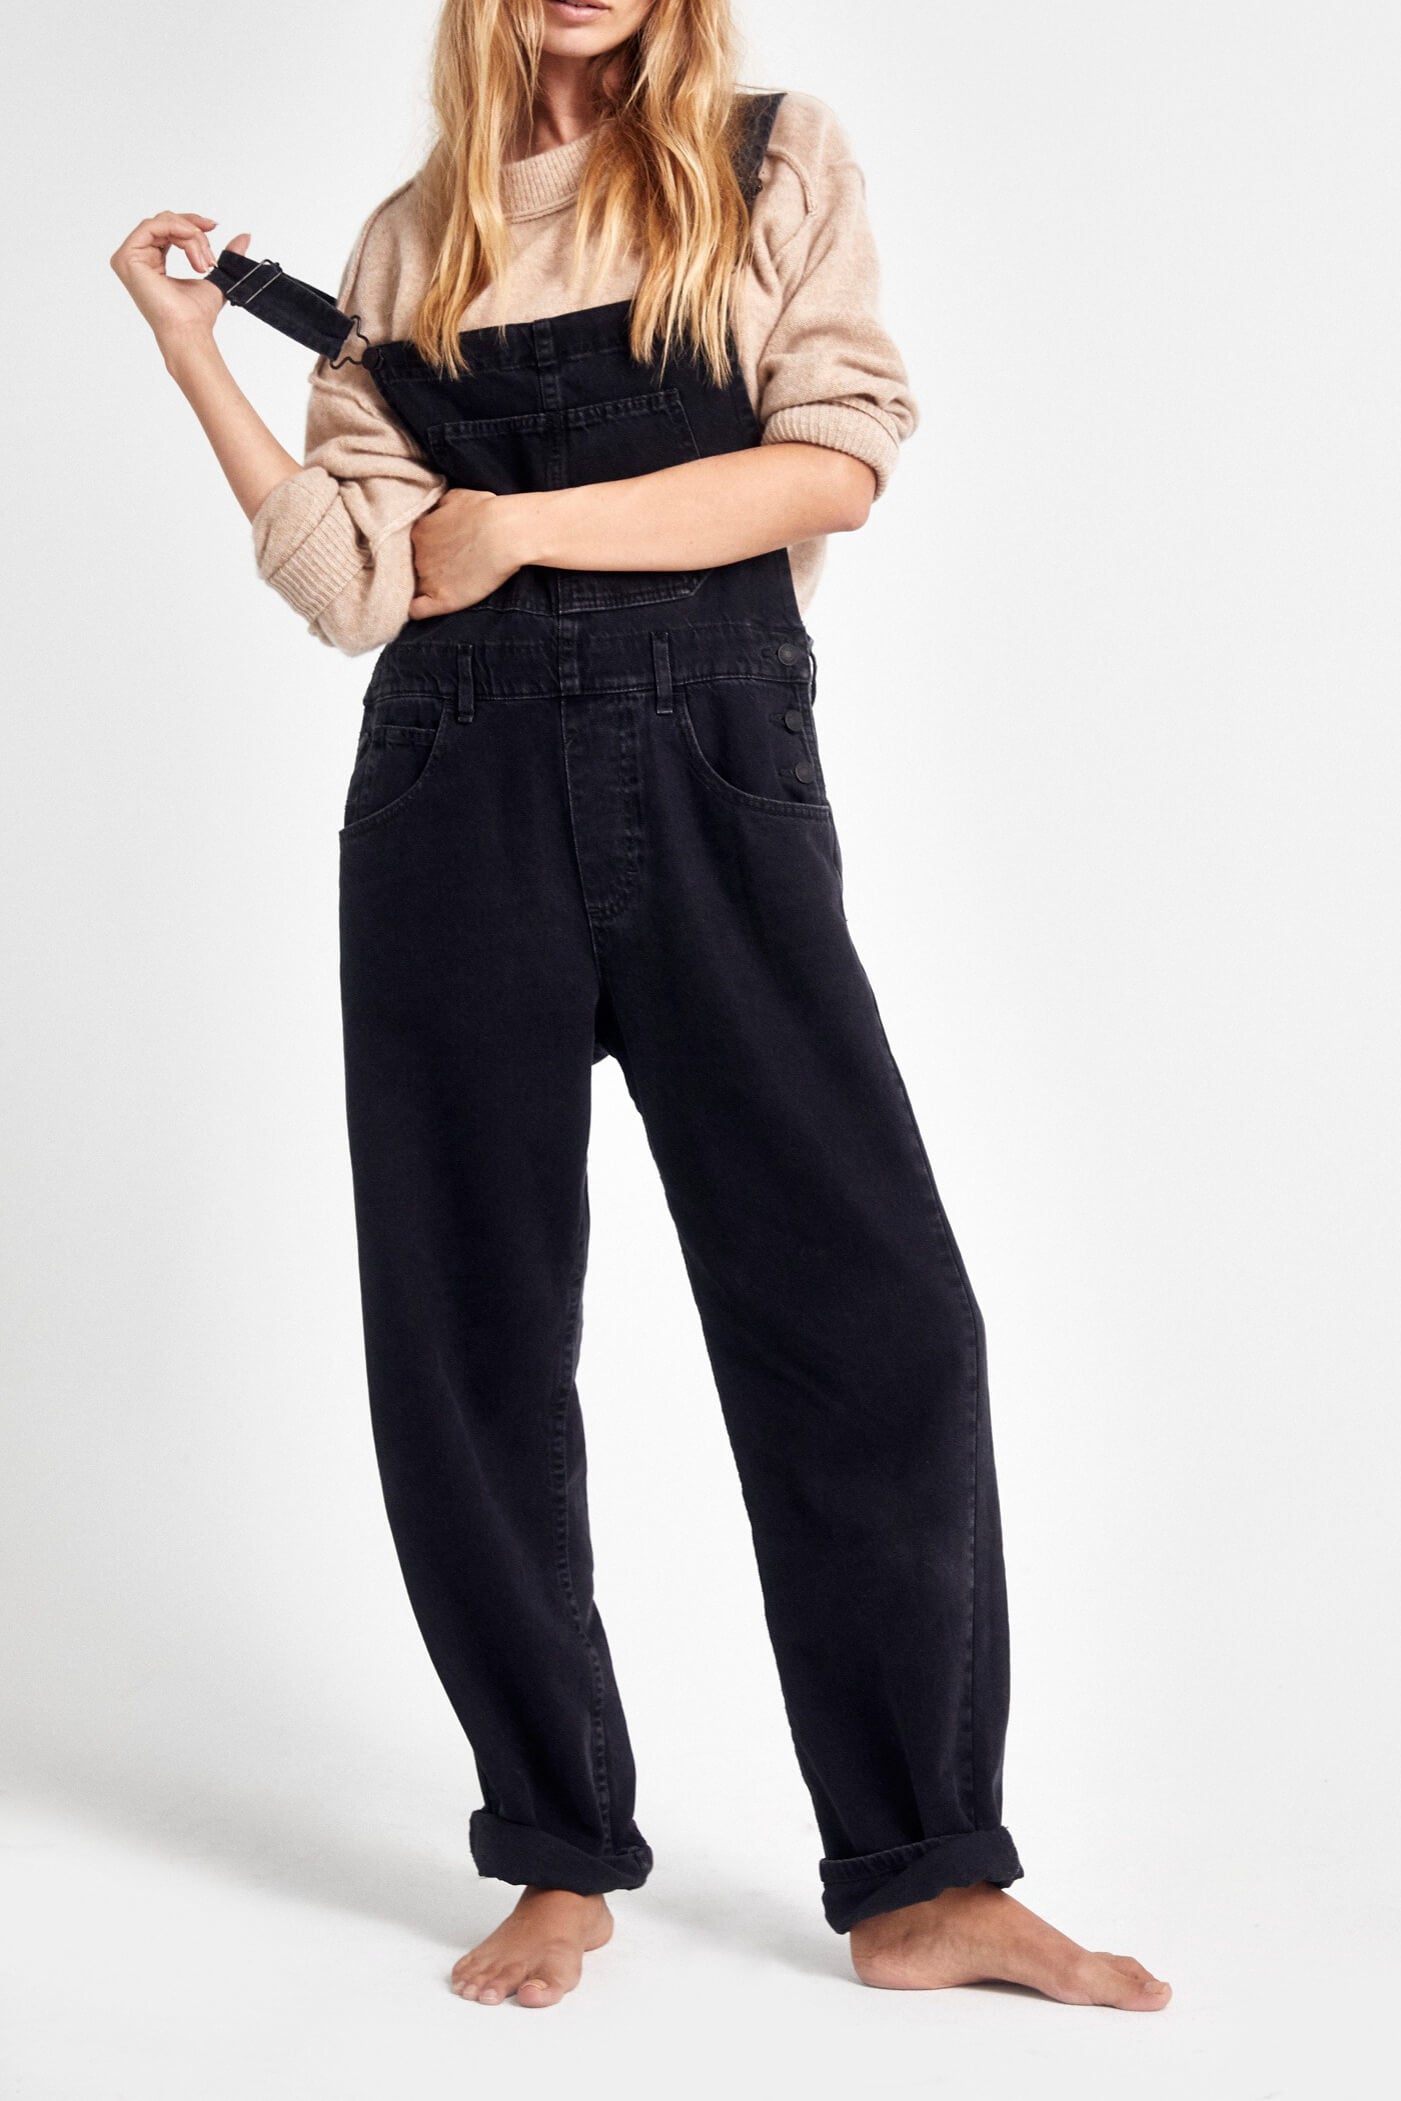 Free People ziggy denim overall in mineral black